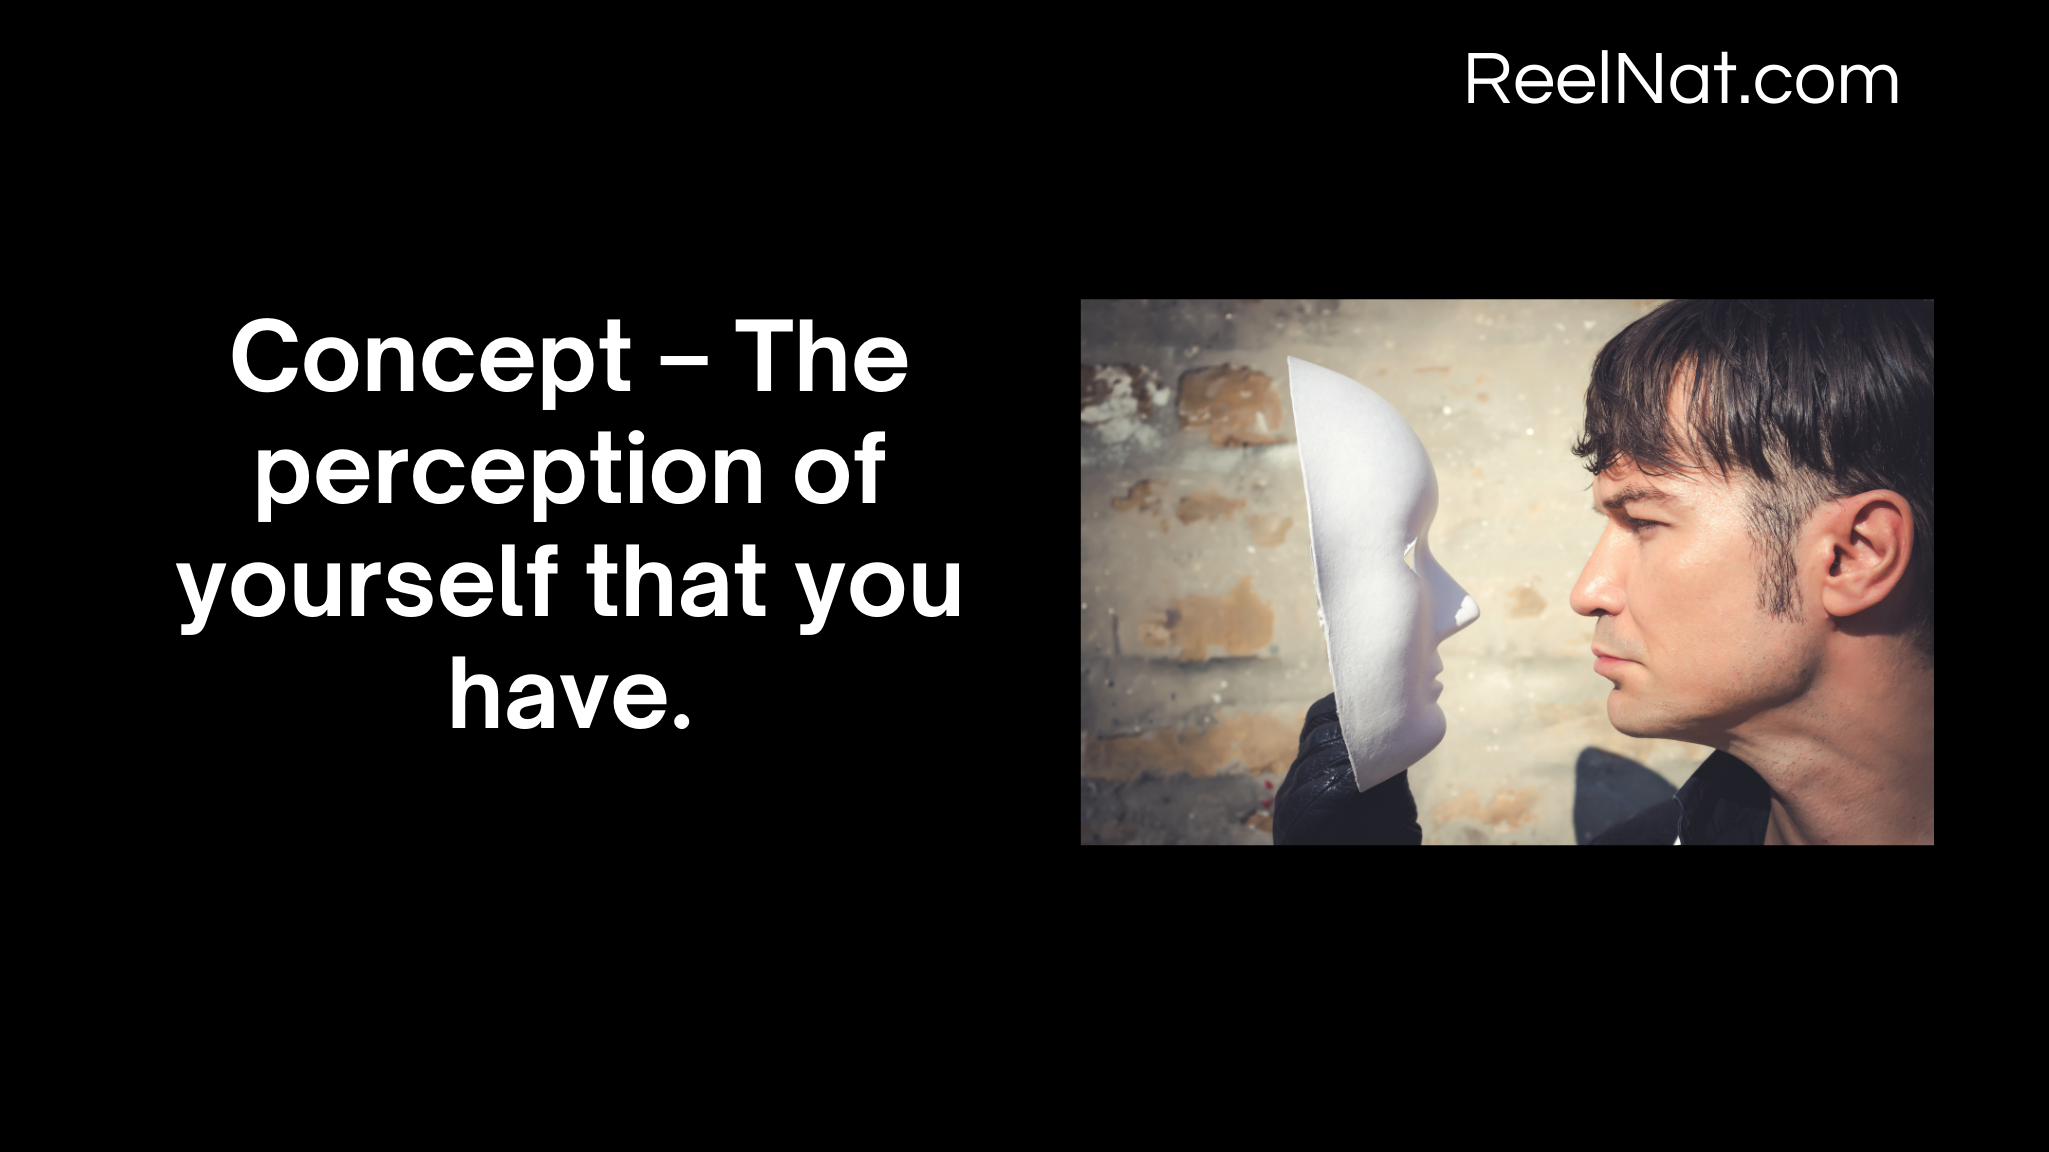 Concept – The perception of yourself that you have.